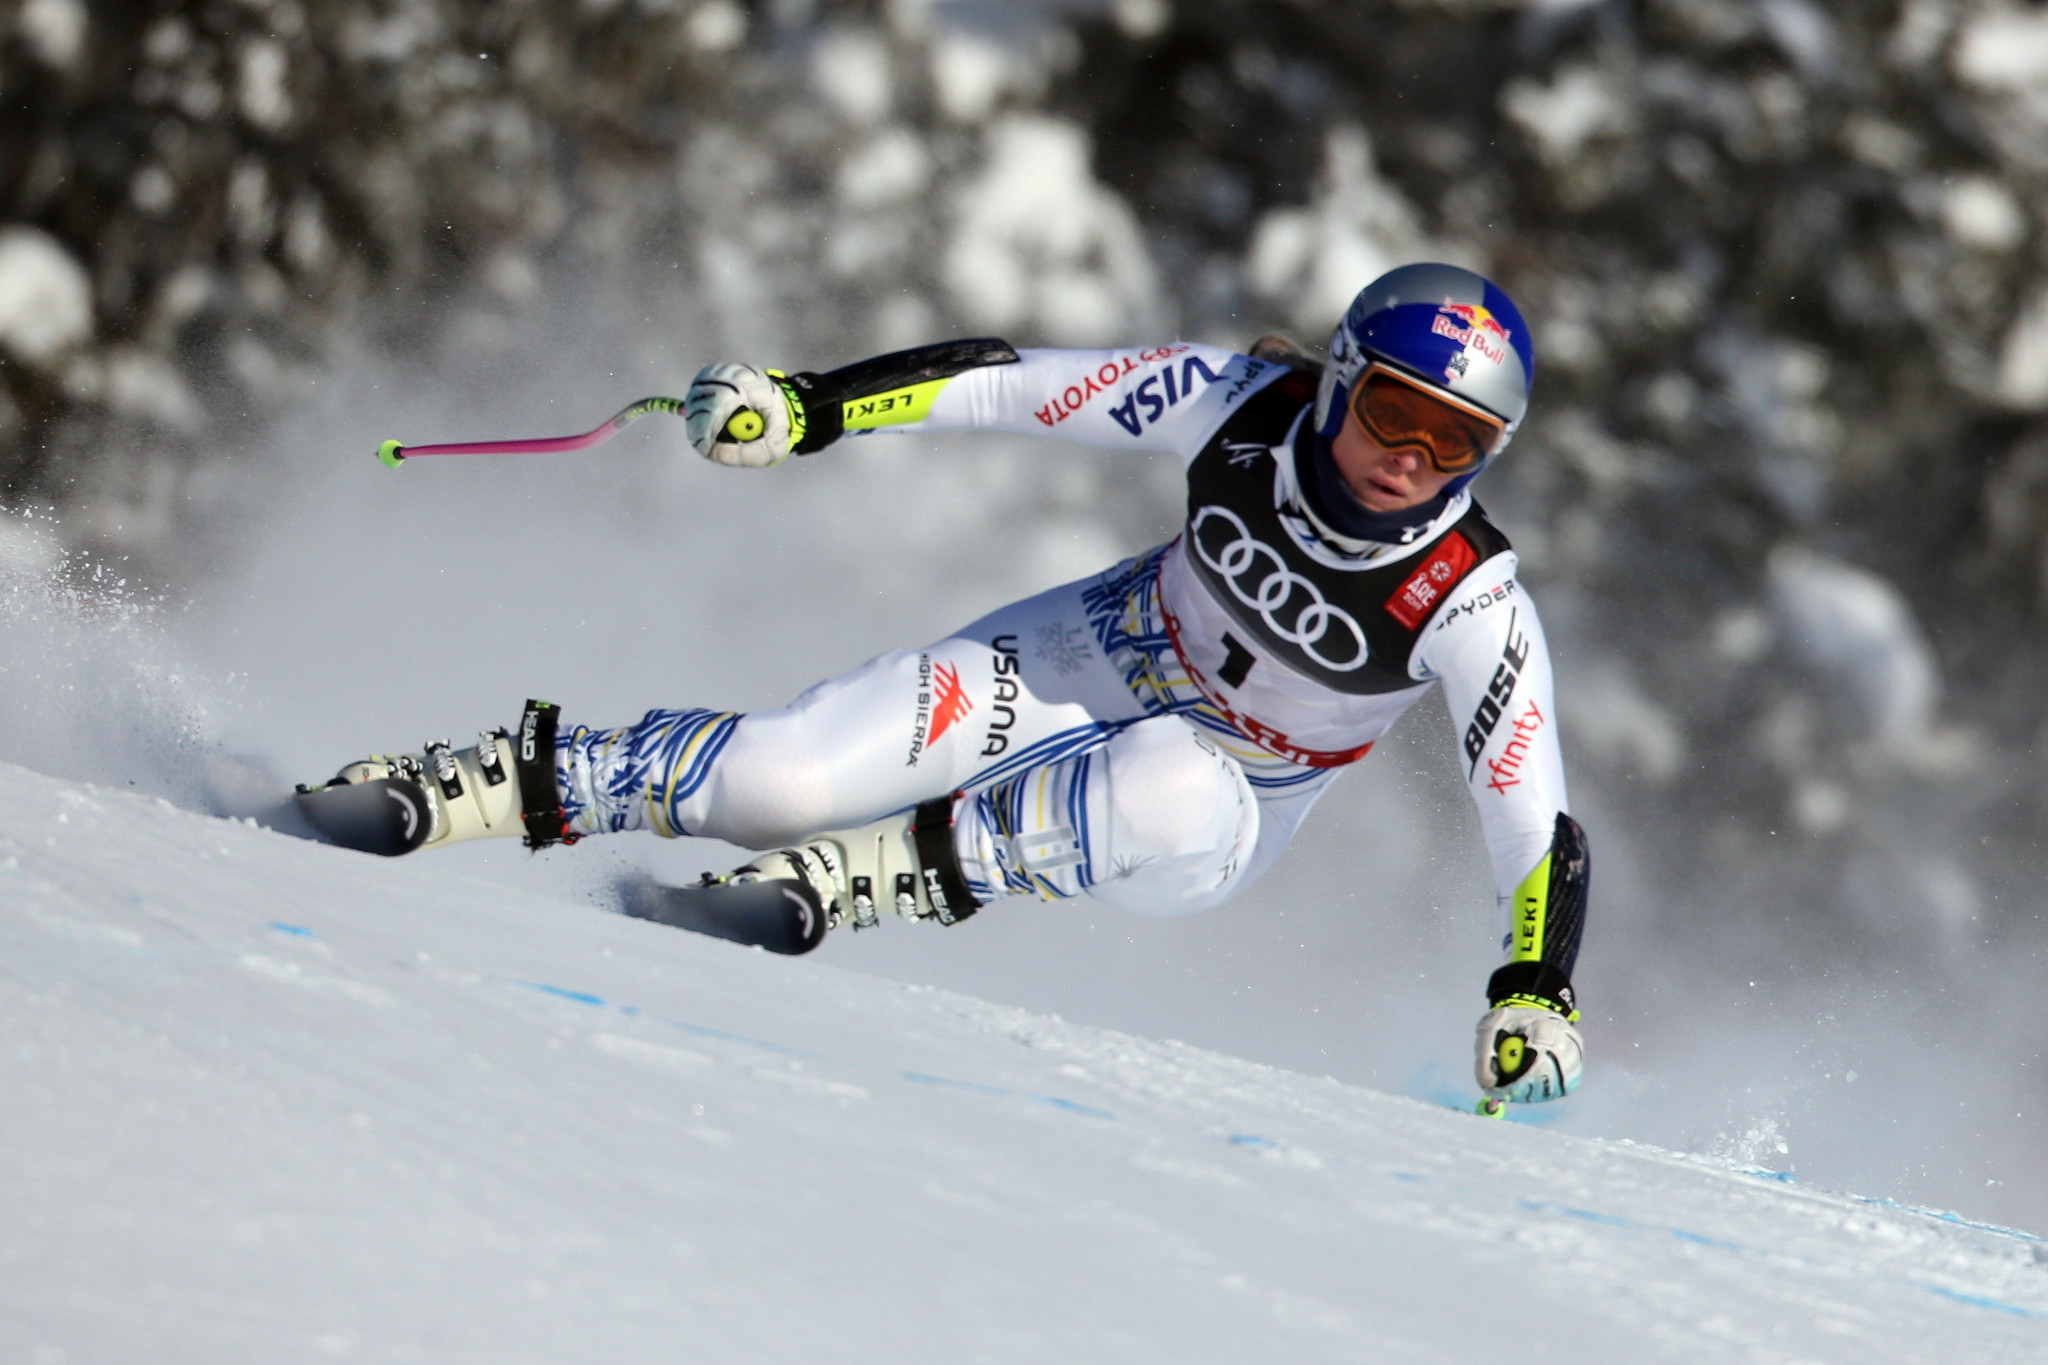 Lindsey Vonn finished 11th in the downhill training event prior to the FIS Alpine World Ski Championships in Åre, which are starting tomorrow ©Getty Images